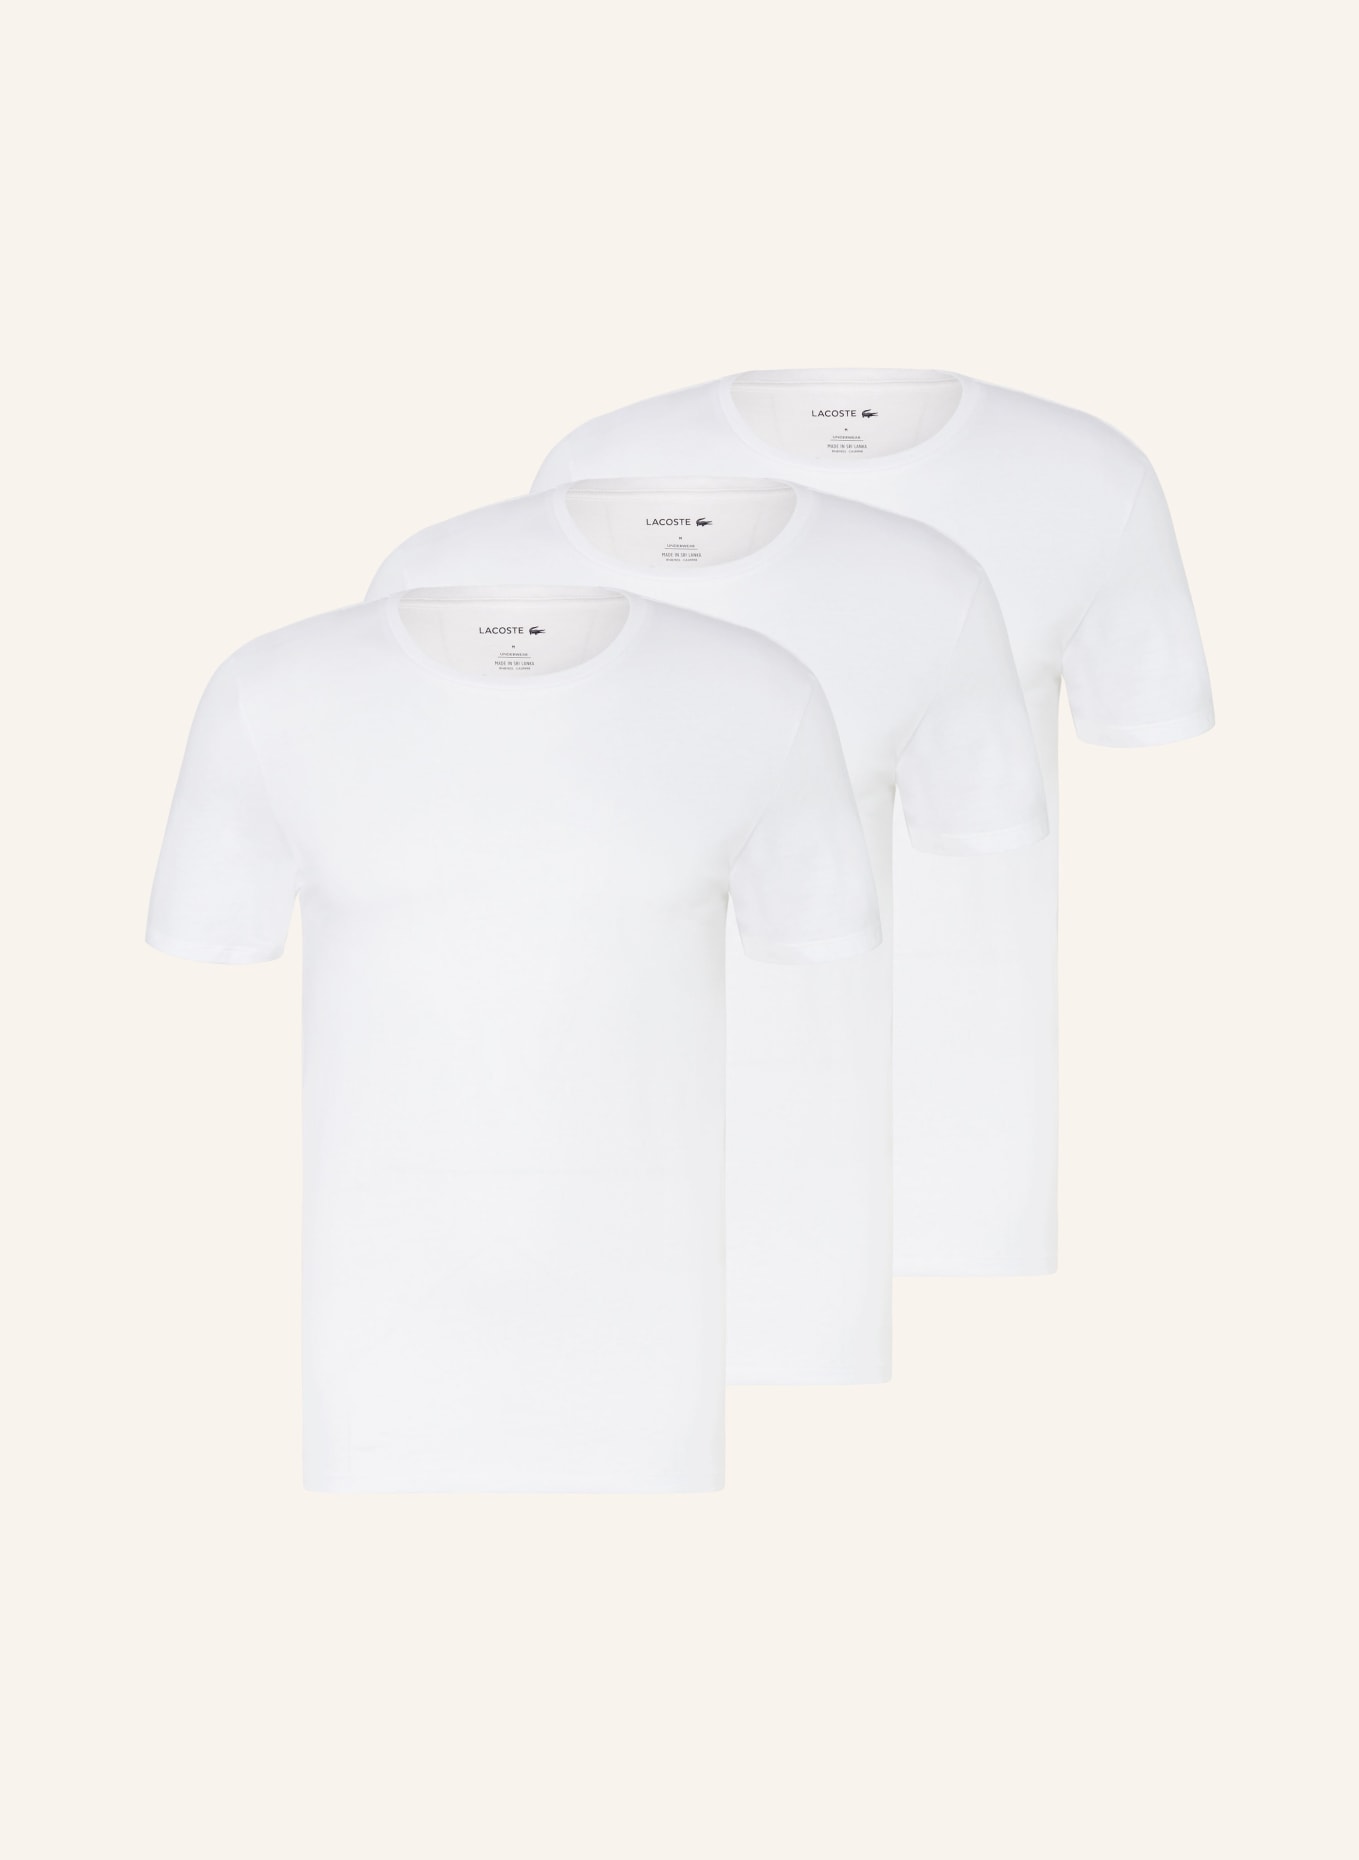 LACOSTE 3er-Pack T-Shirts, Farbe: WEISS (Bild 1)